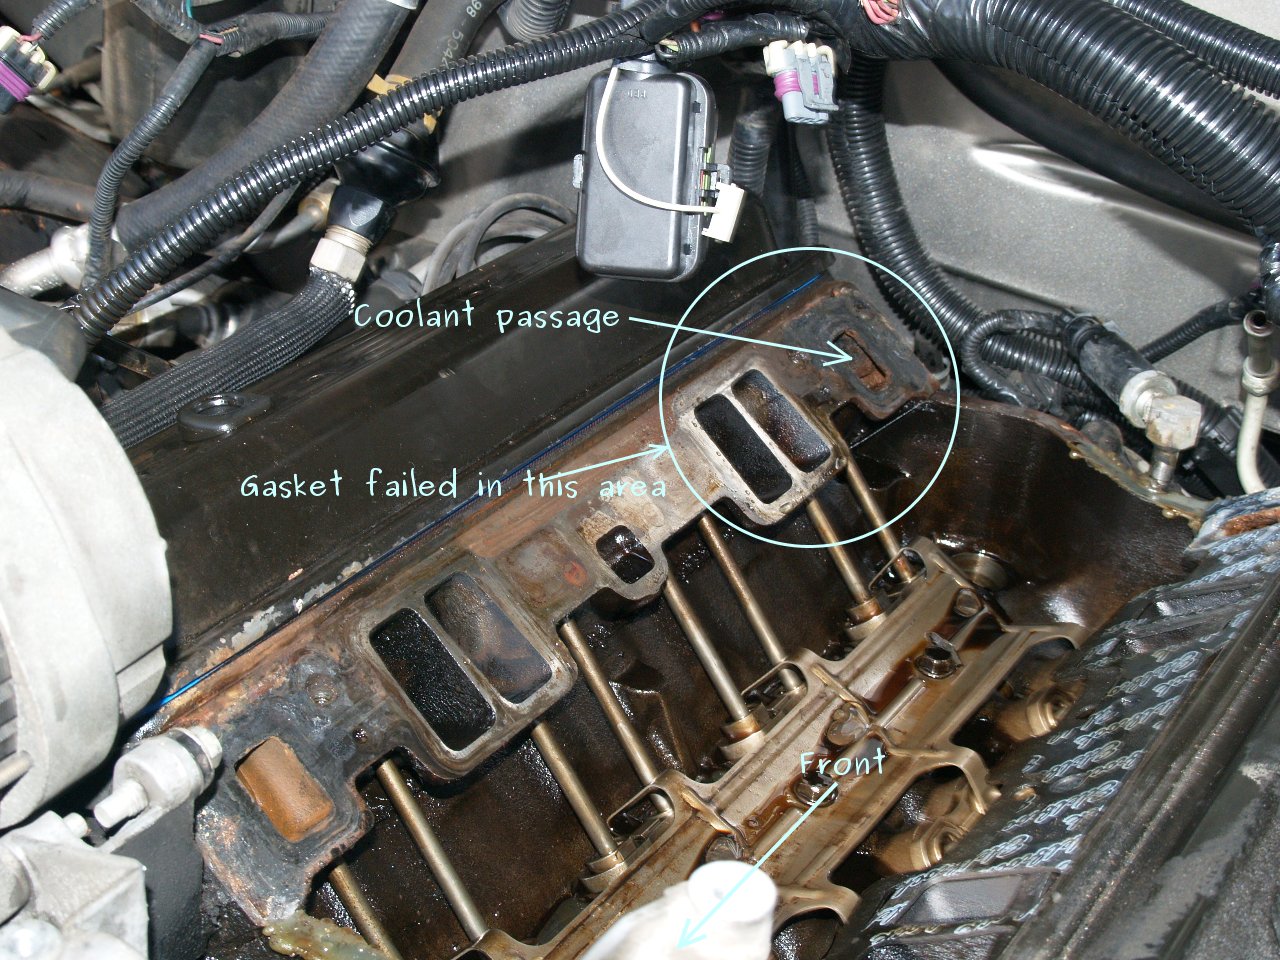 See P0247 in engine